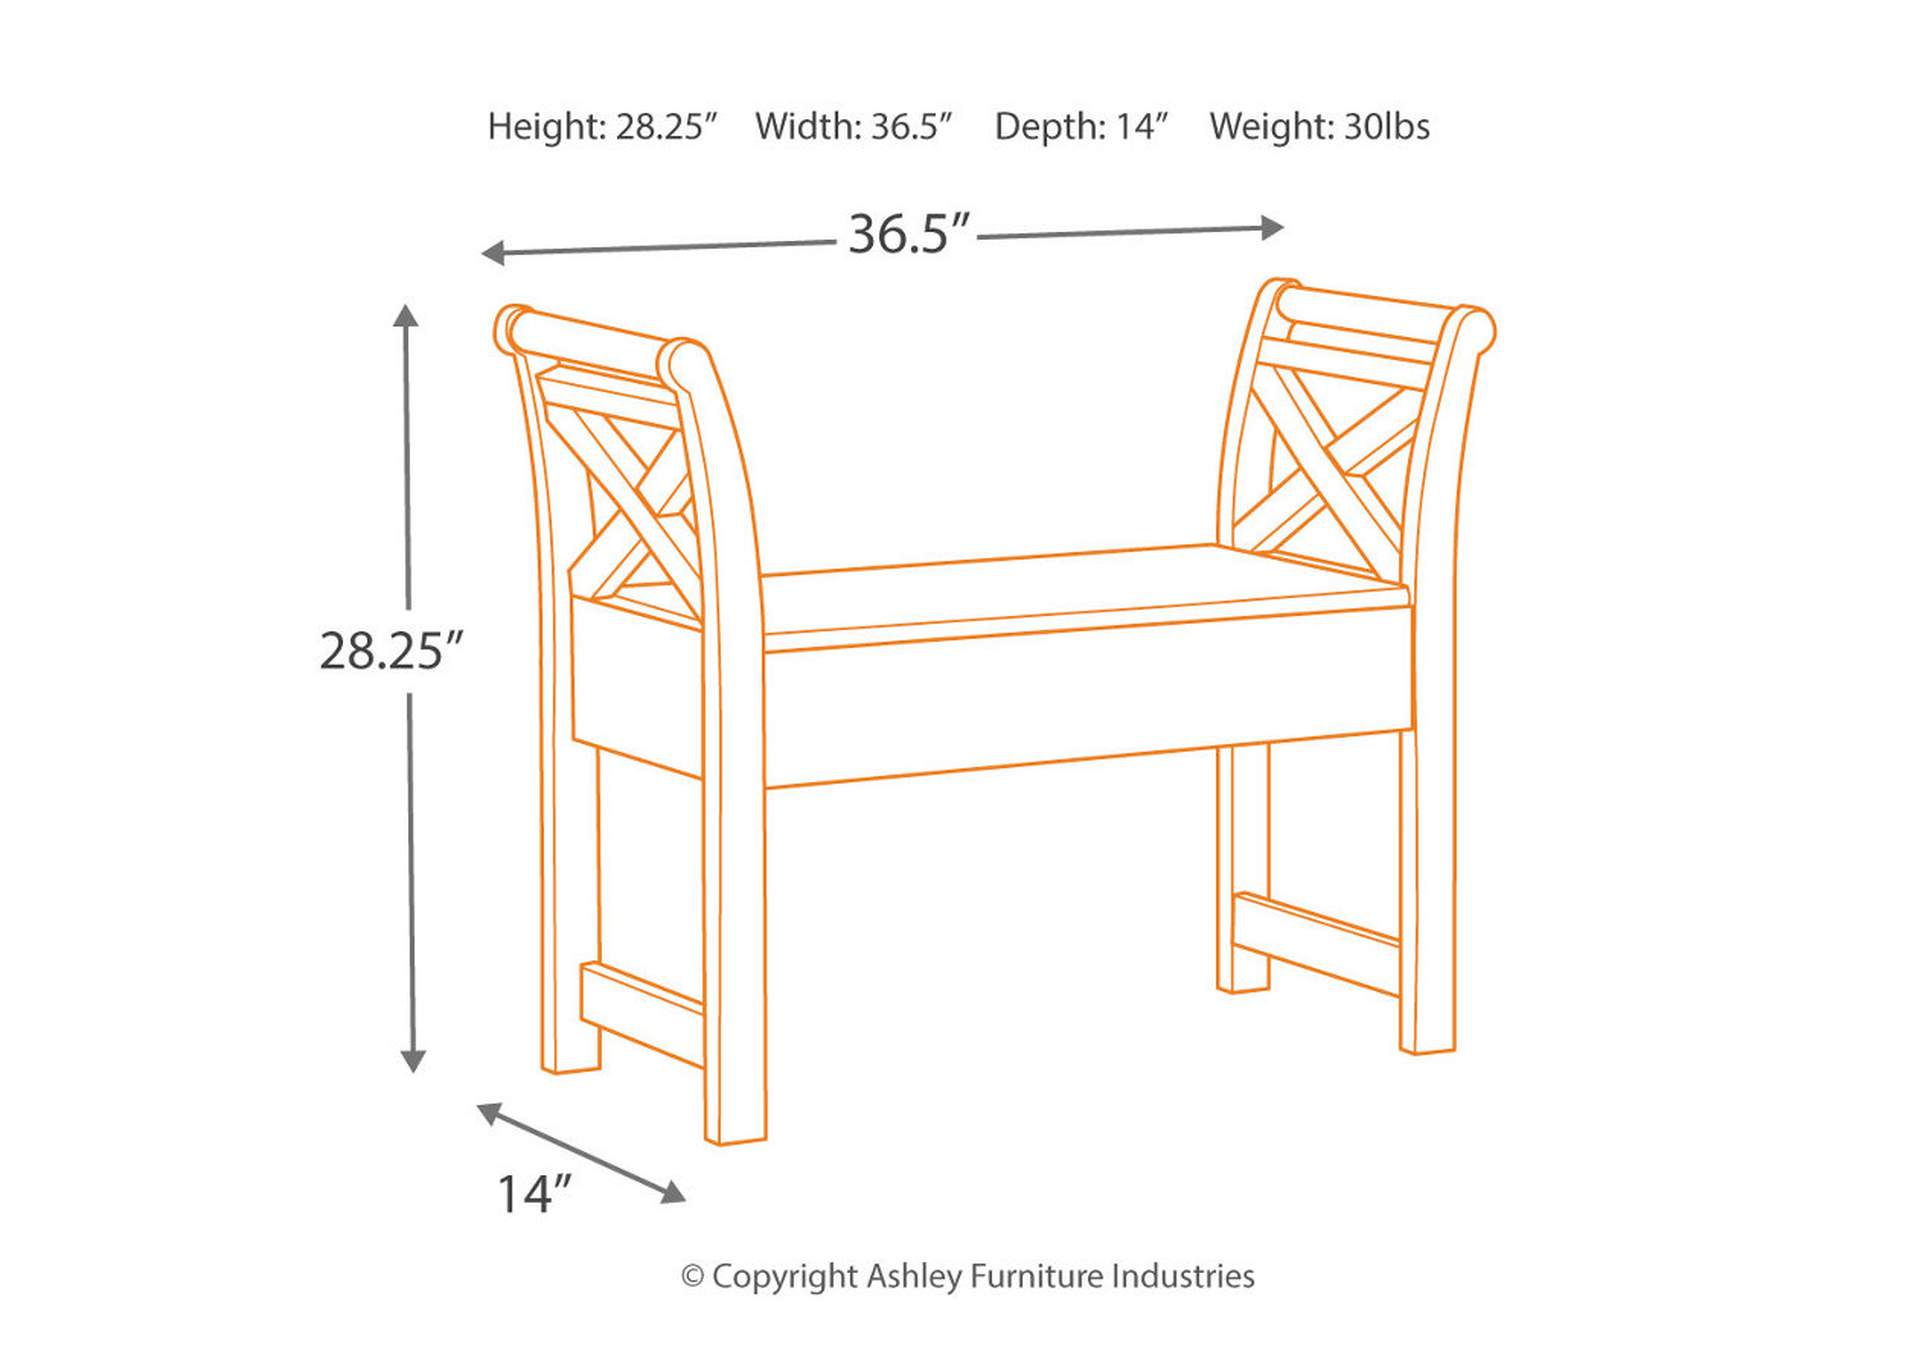 Heron Ridge Accent Bench,Direct To Consumer Express